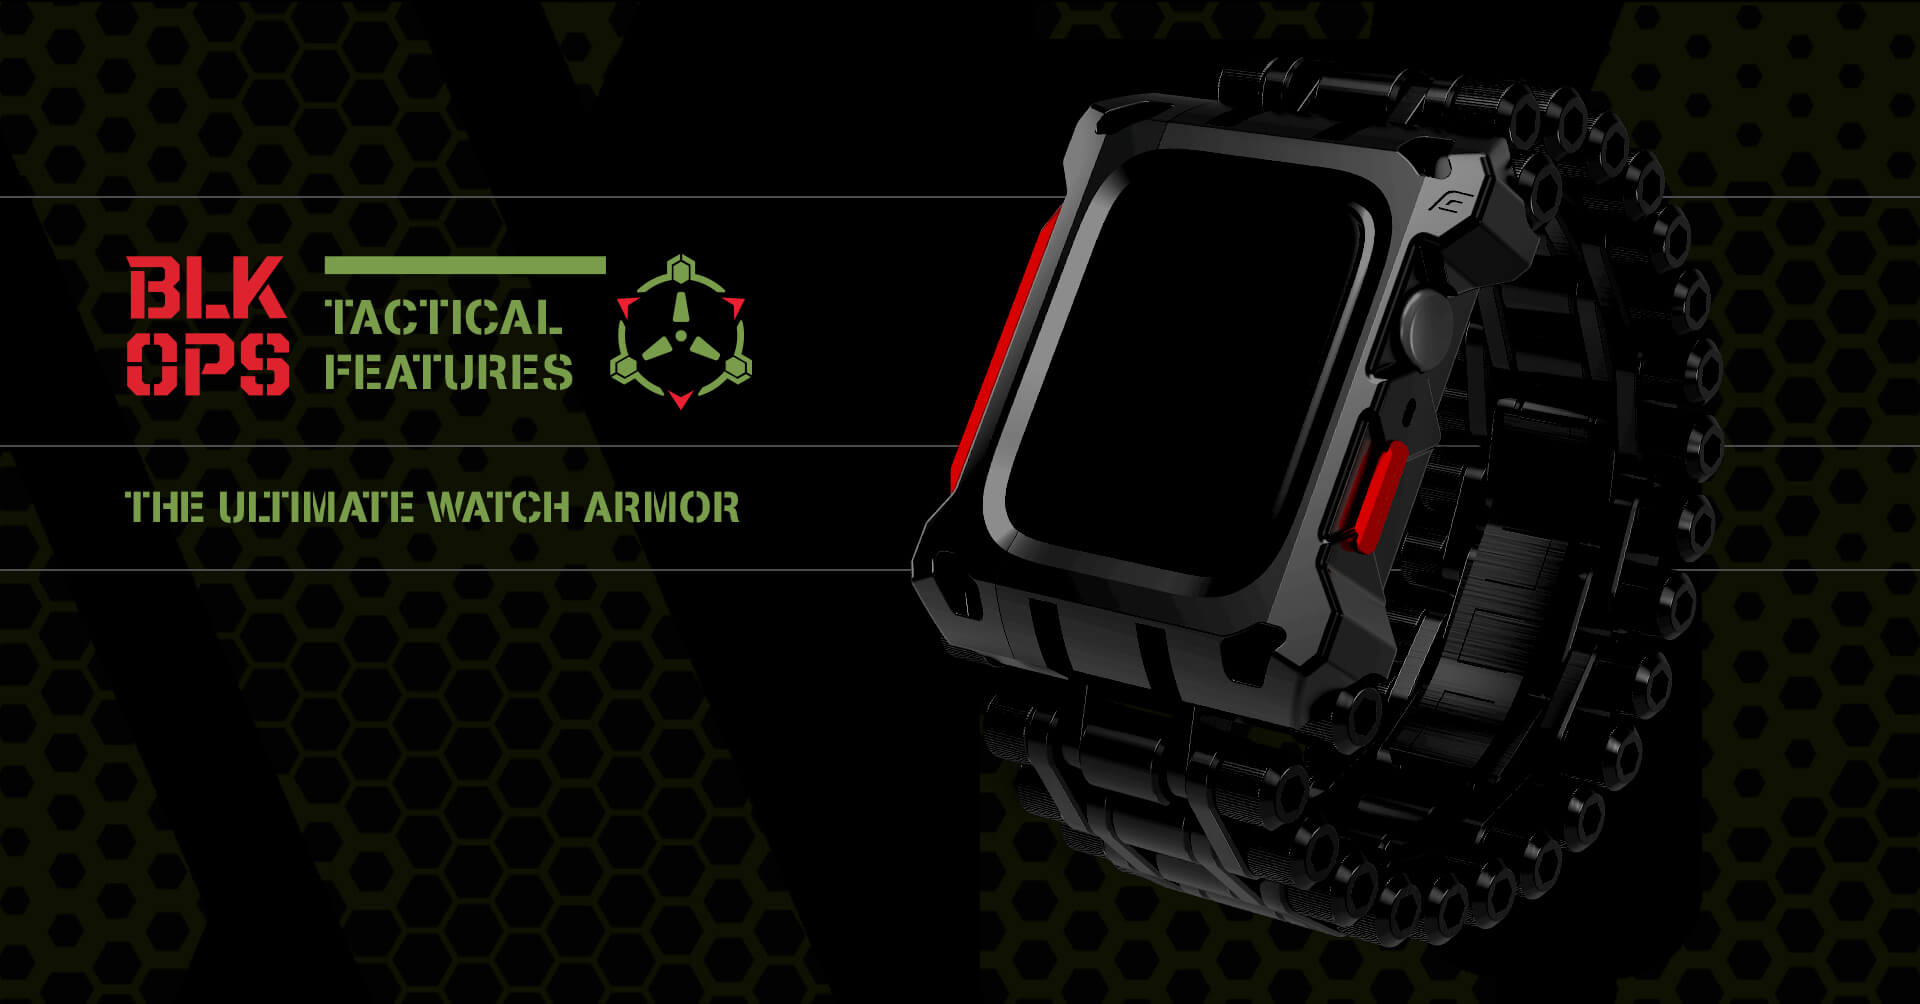 Black Ops Tactical Features – The Ultimate Watch Armor